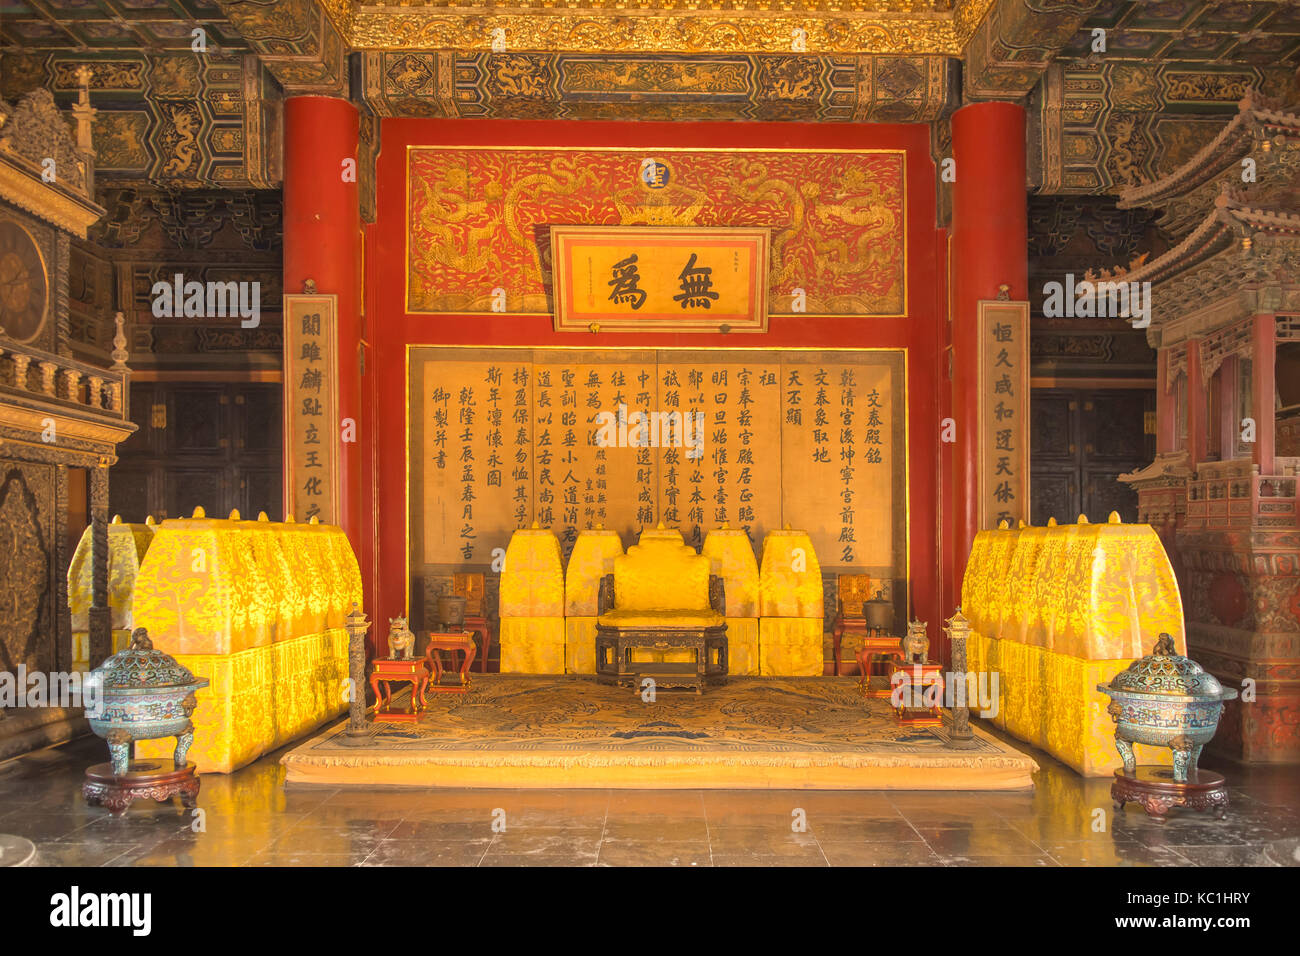 Inside Palace of Heavenly Purity in Forbidden City, Beijing, China Stock Photo